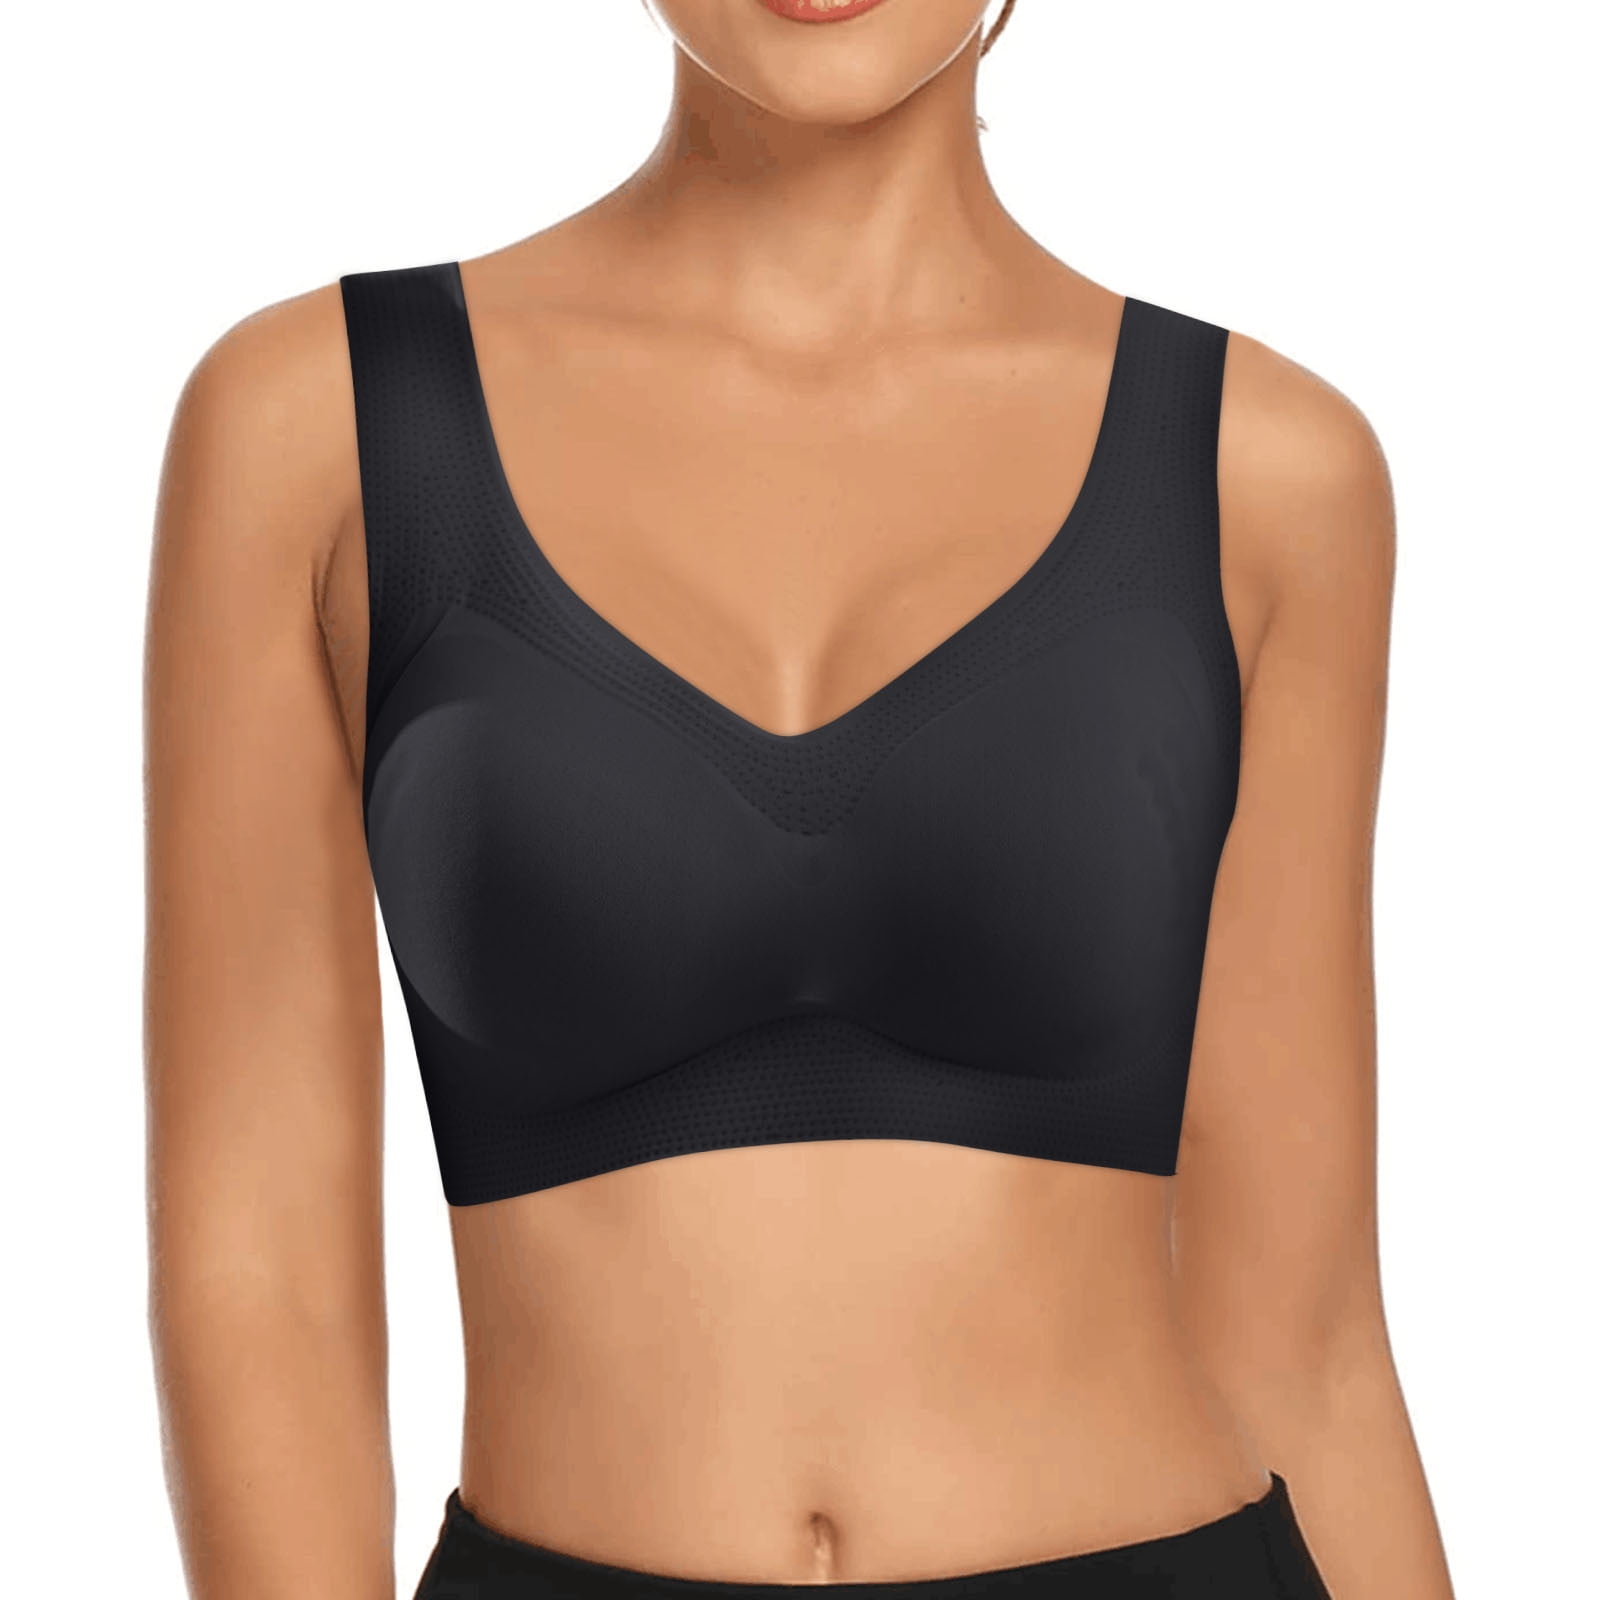 Deals of the Day!Lolmot Daisy Bra,Sports Bras for Women Front Closure No  Underwire Push up high Support Large Racerback knix Bras